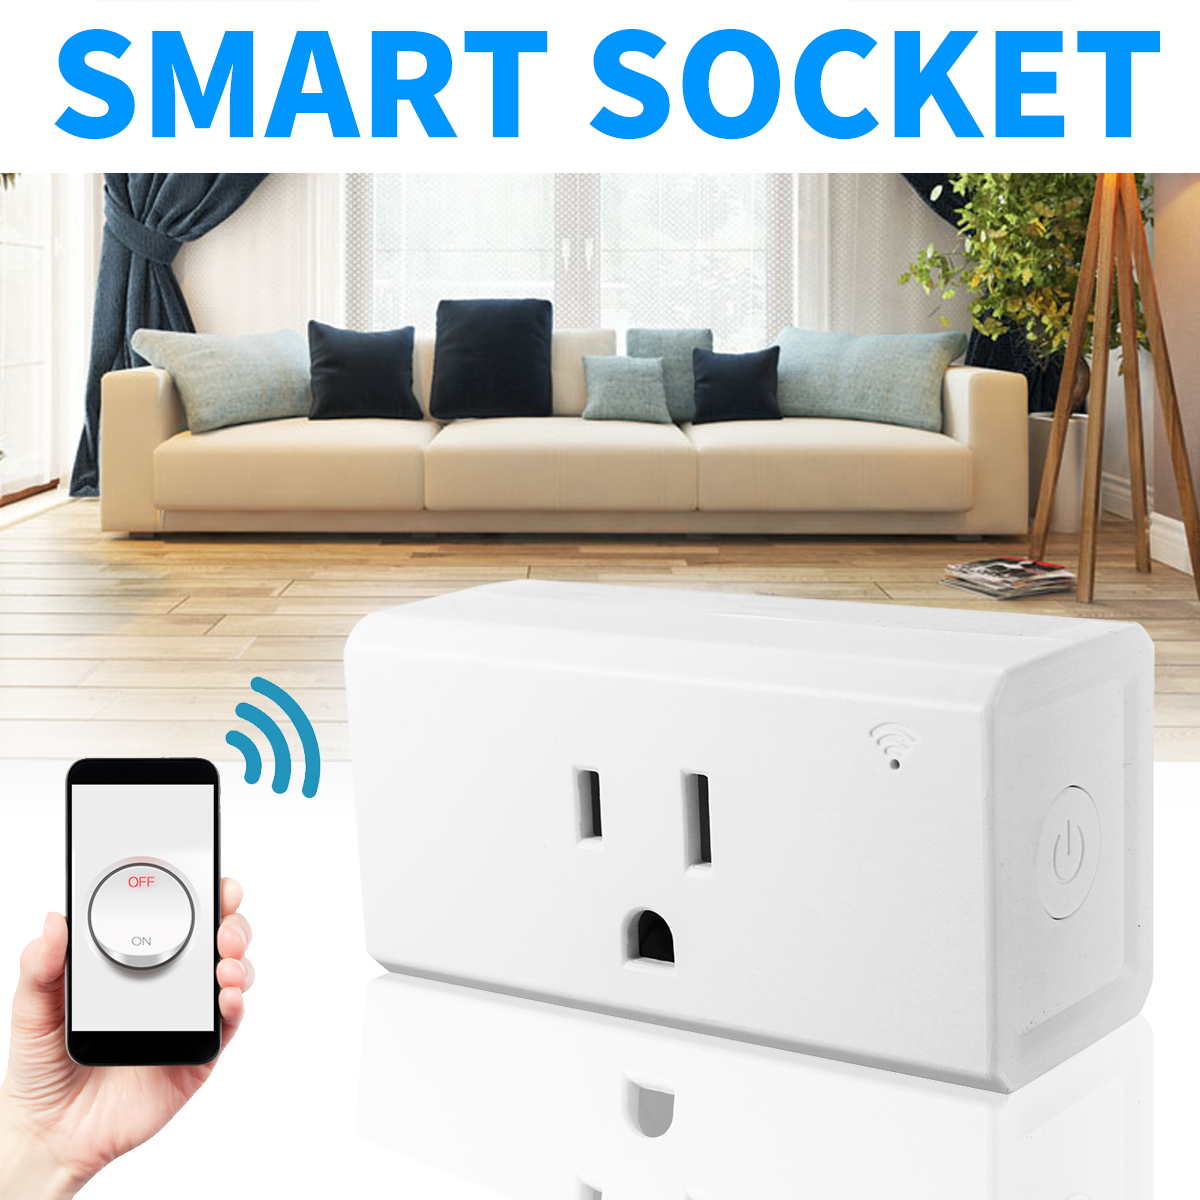 Excellwayreg-Wifi-Smart-Plug-Smart-Socket-Outlet-Compatible-with-Alexa-and-Google-Home-Voice-Control-1258076-1